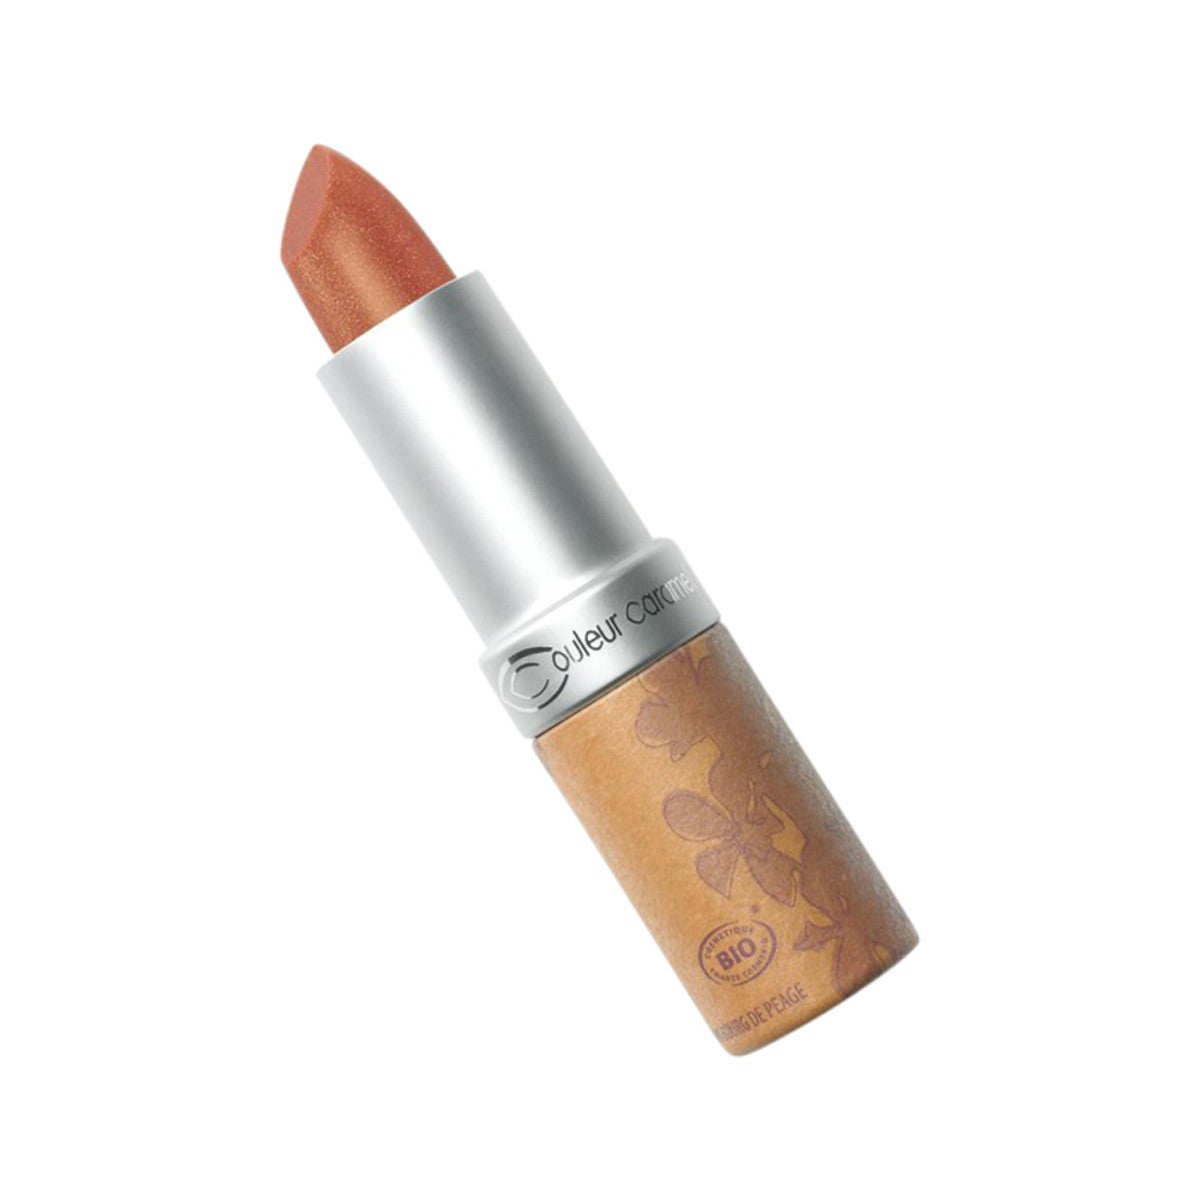 Couleur Caramel - Lipstick Pearly Sublime Peach (237)